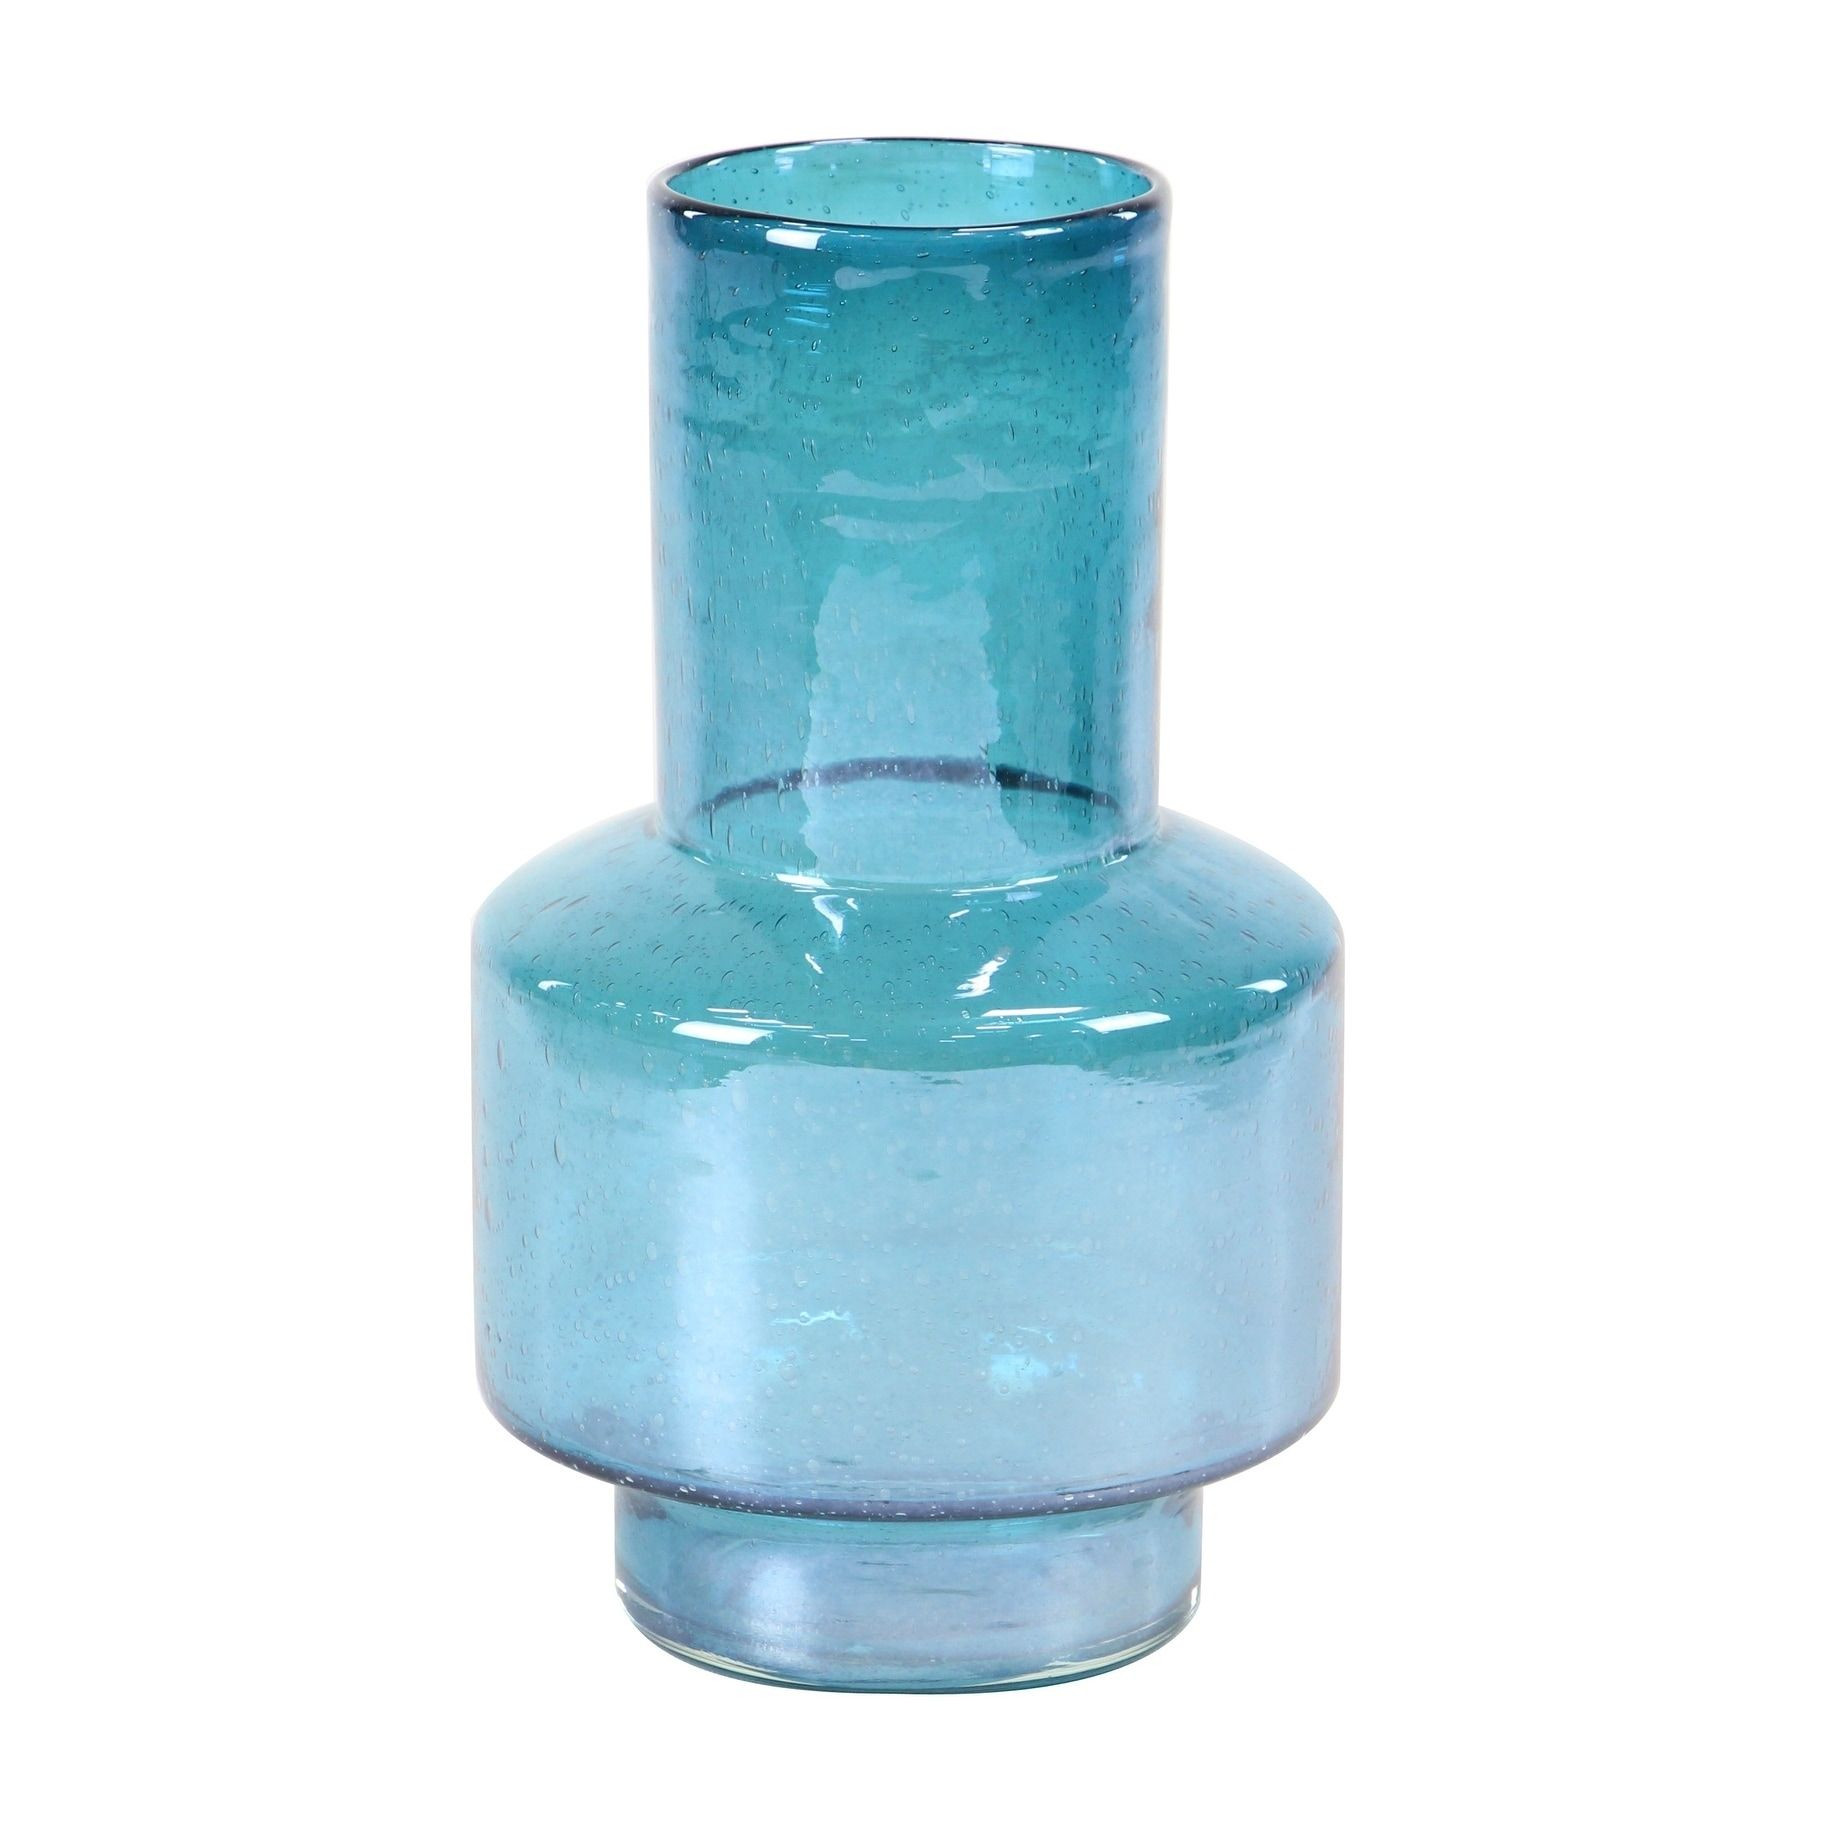 8 inch glass vase of studio 350 eclectic 13 x 8 inch blue handmade glass bud vase size with regard to studio 350 eclectic 13 x 8 inch blue handmade glass bud vase size medium 8 15